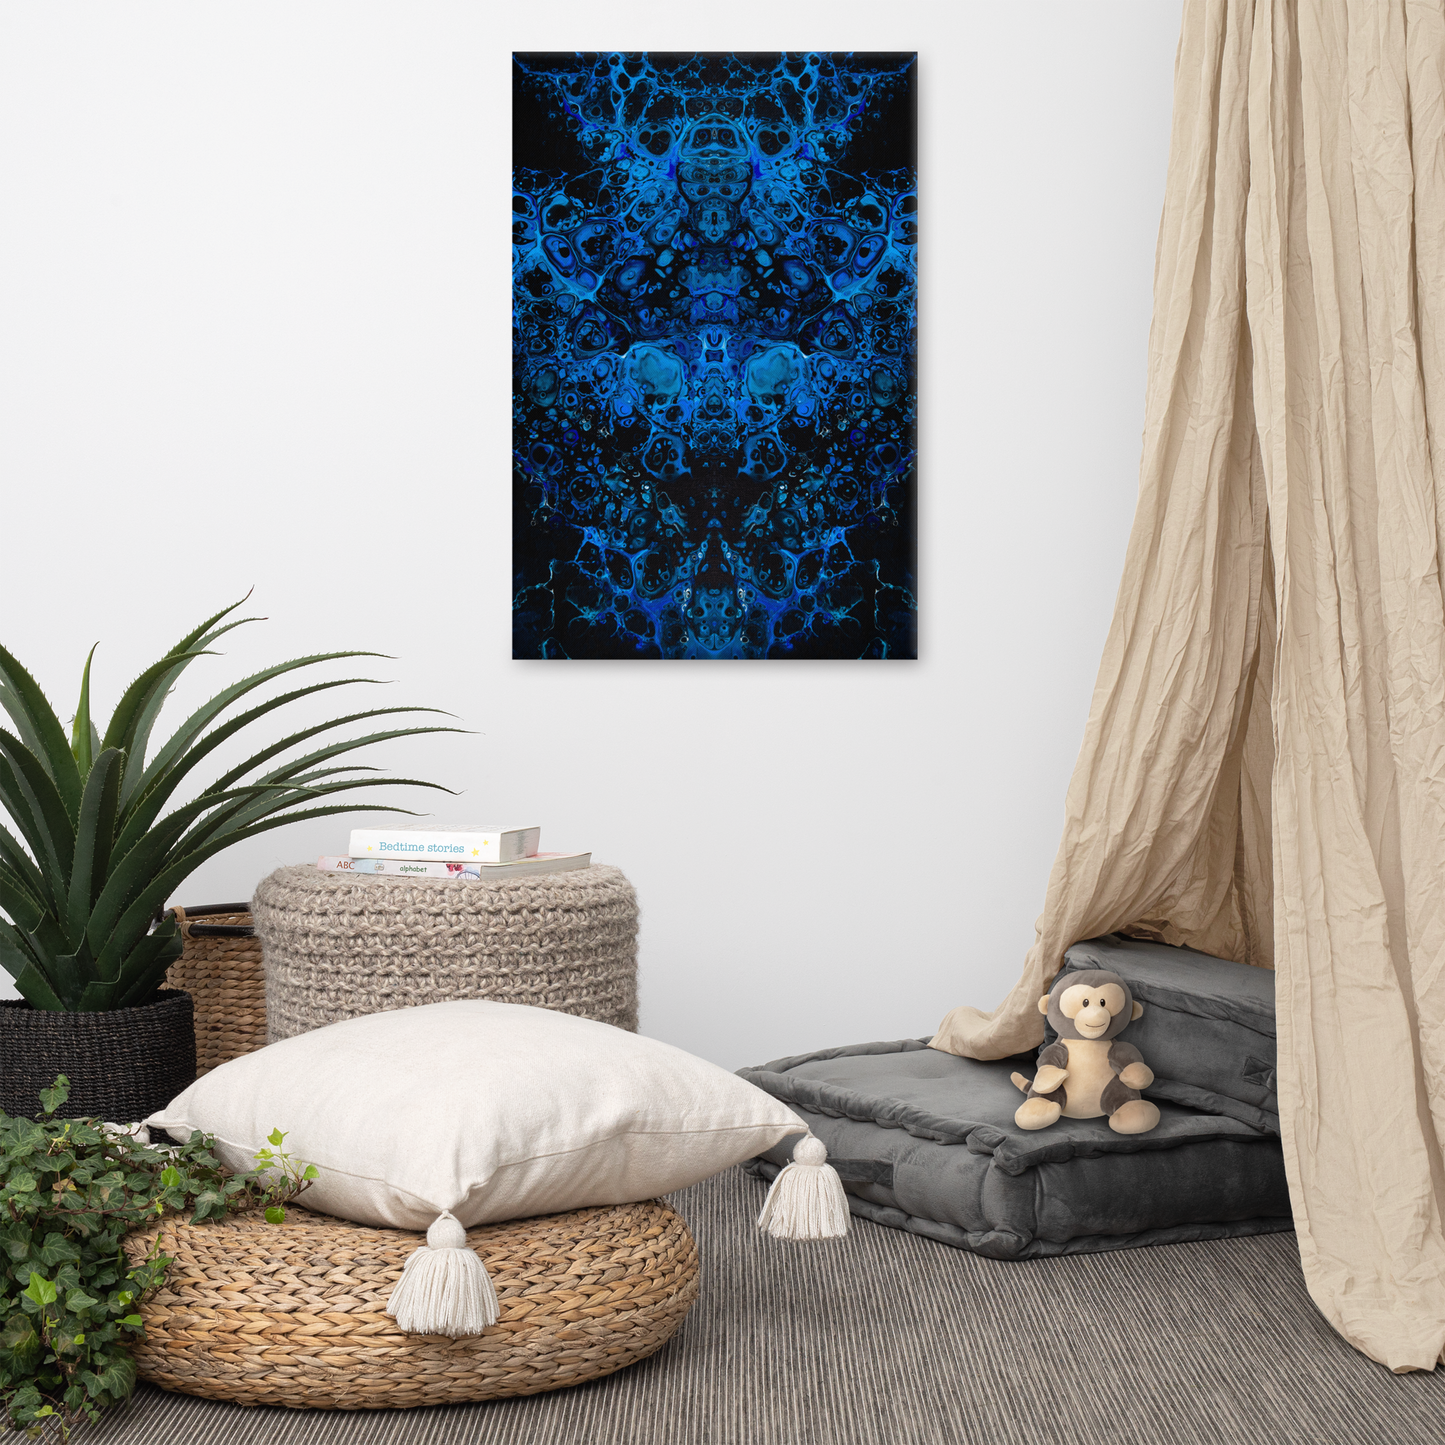 NightOwl Studio Abstract Wall Art, Azul, Boho Living Room, Bedroom, Office, and Home Decor, Premium Canvas with Wooden Frame, Acrylic Painting Reproduction, 24” x 36”